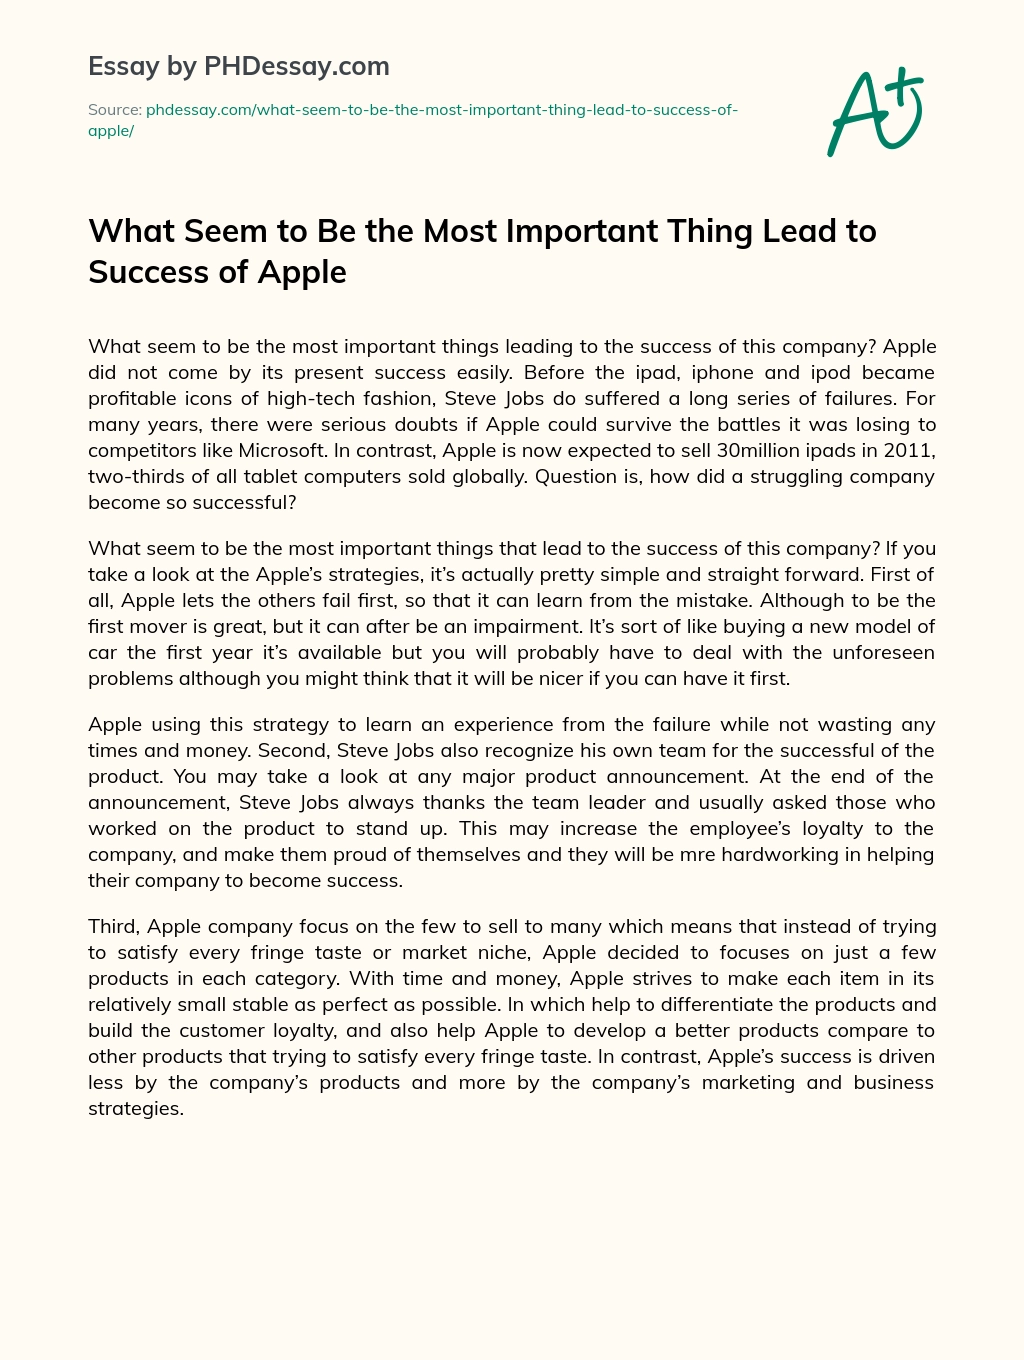 What Seem to Be the Most Important Thing Lead to Success of Apple essay